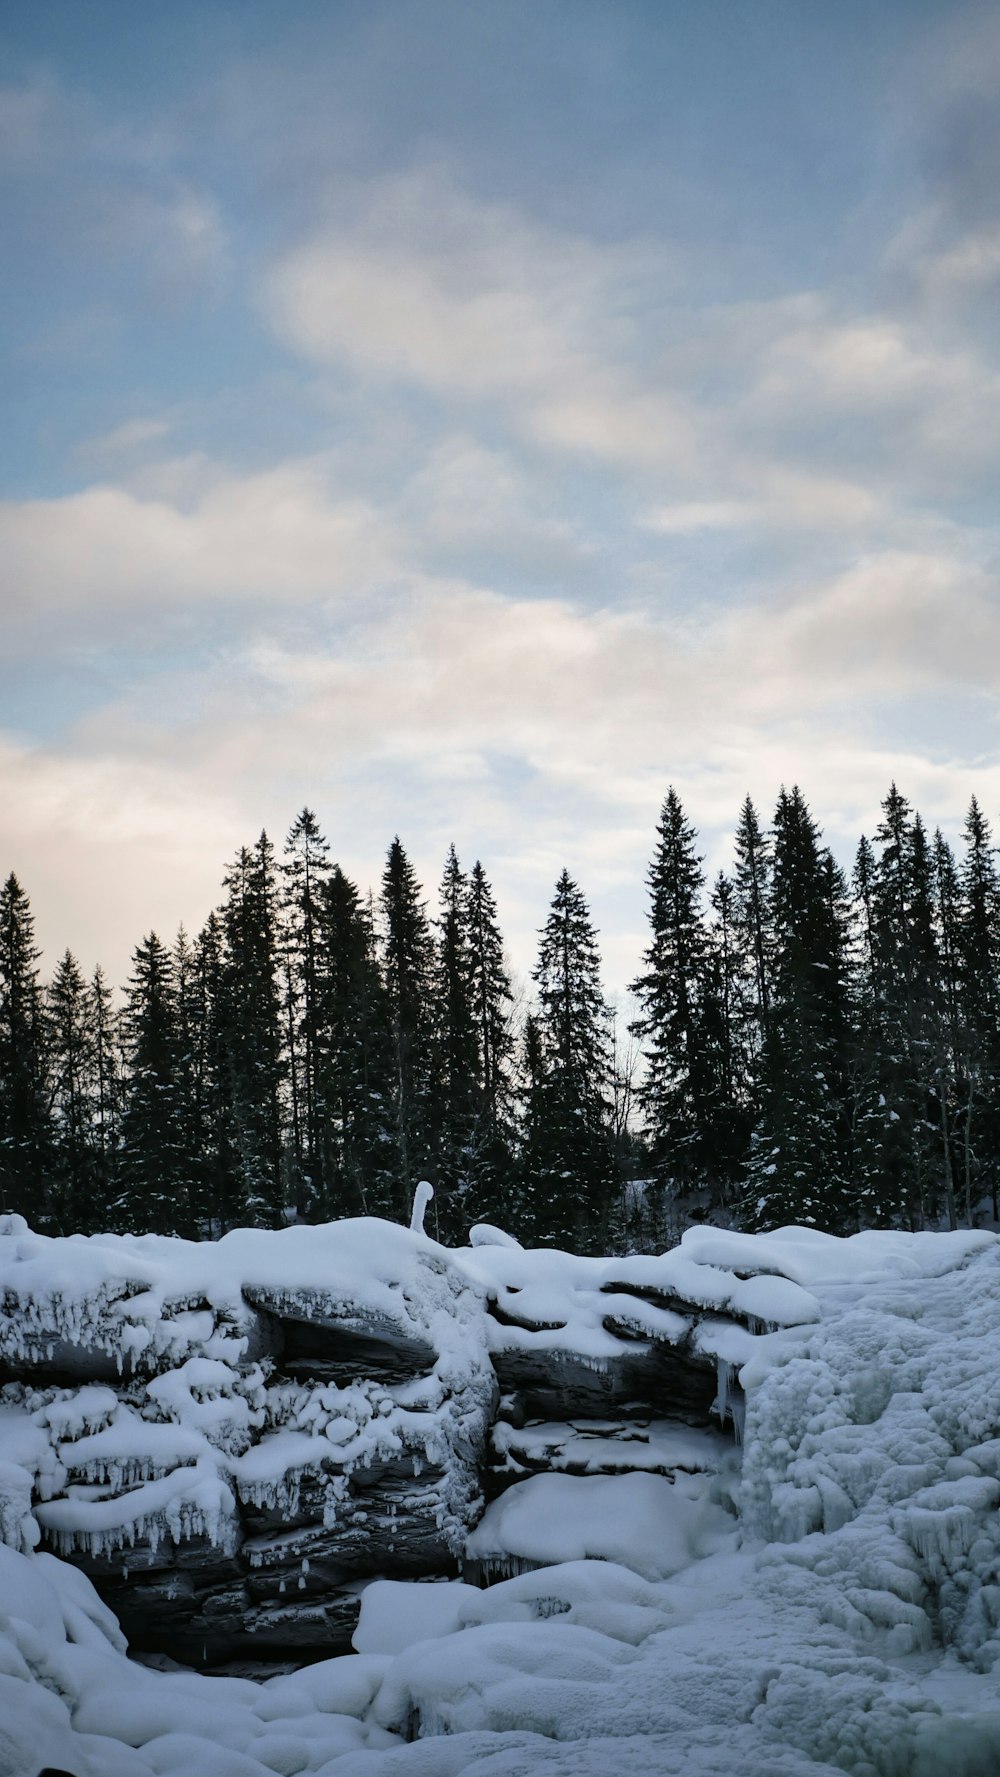 snow covered rocks and trees under a cloudy sky